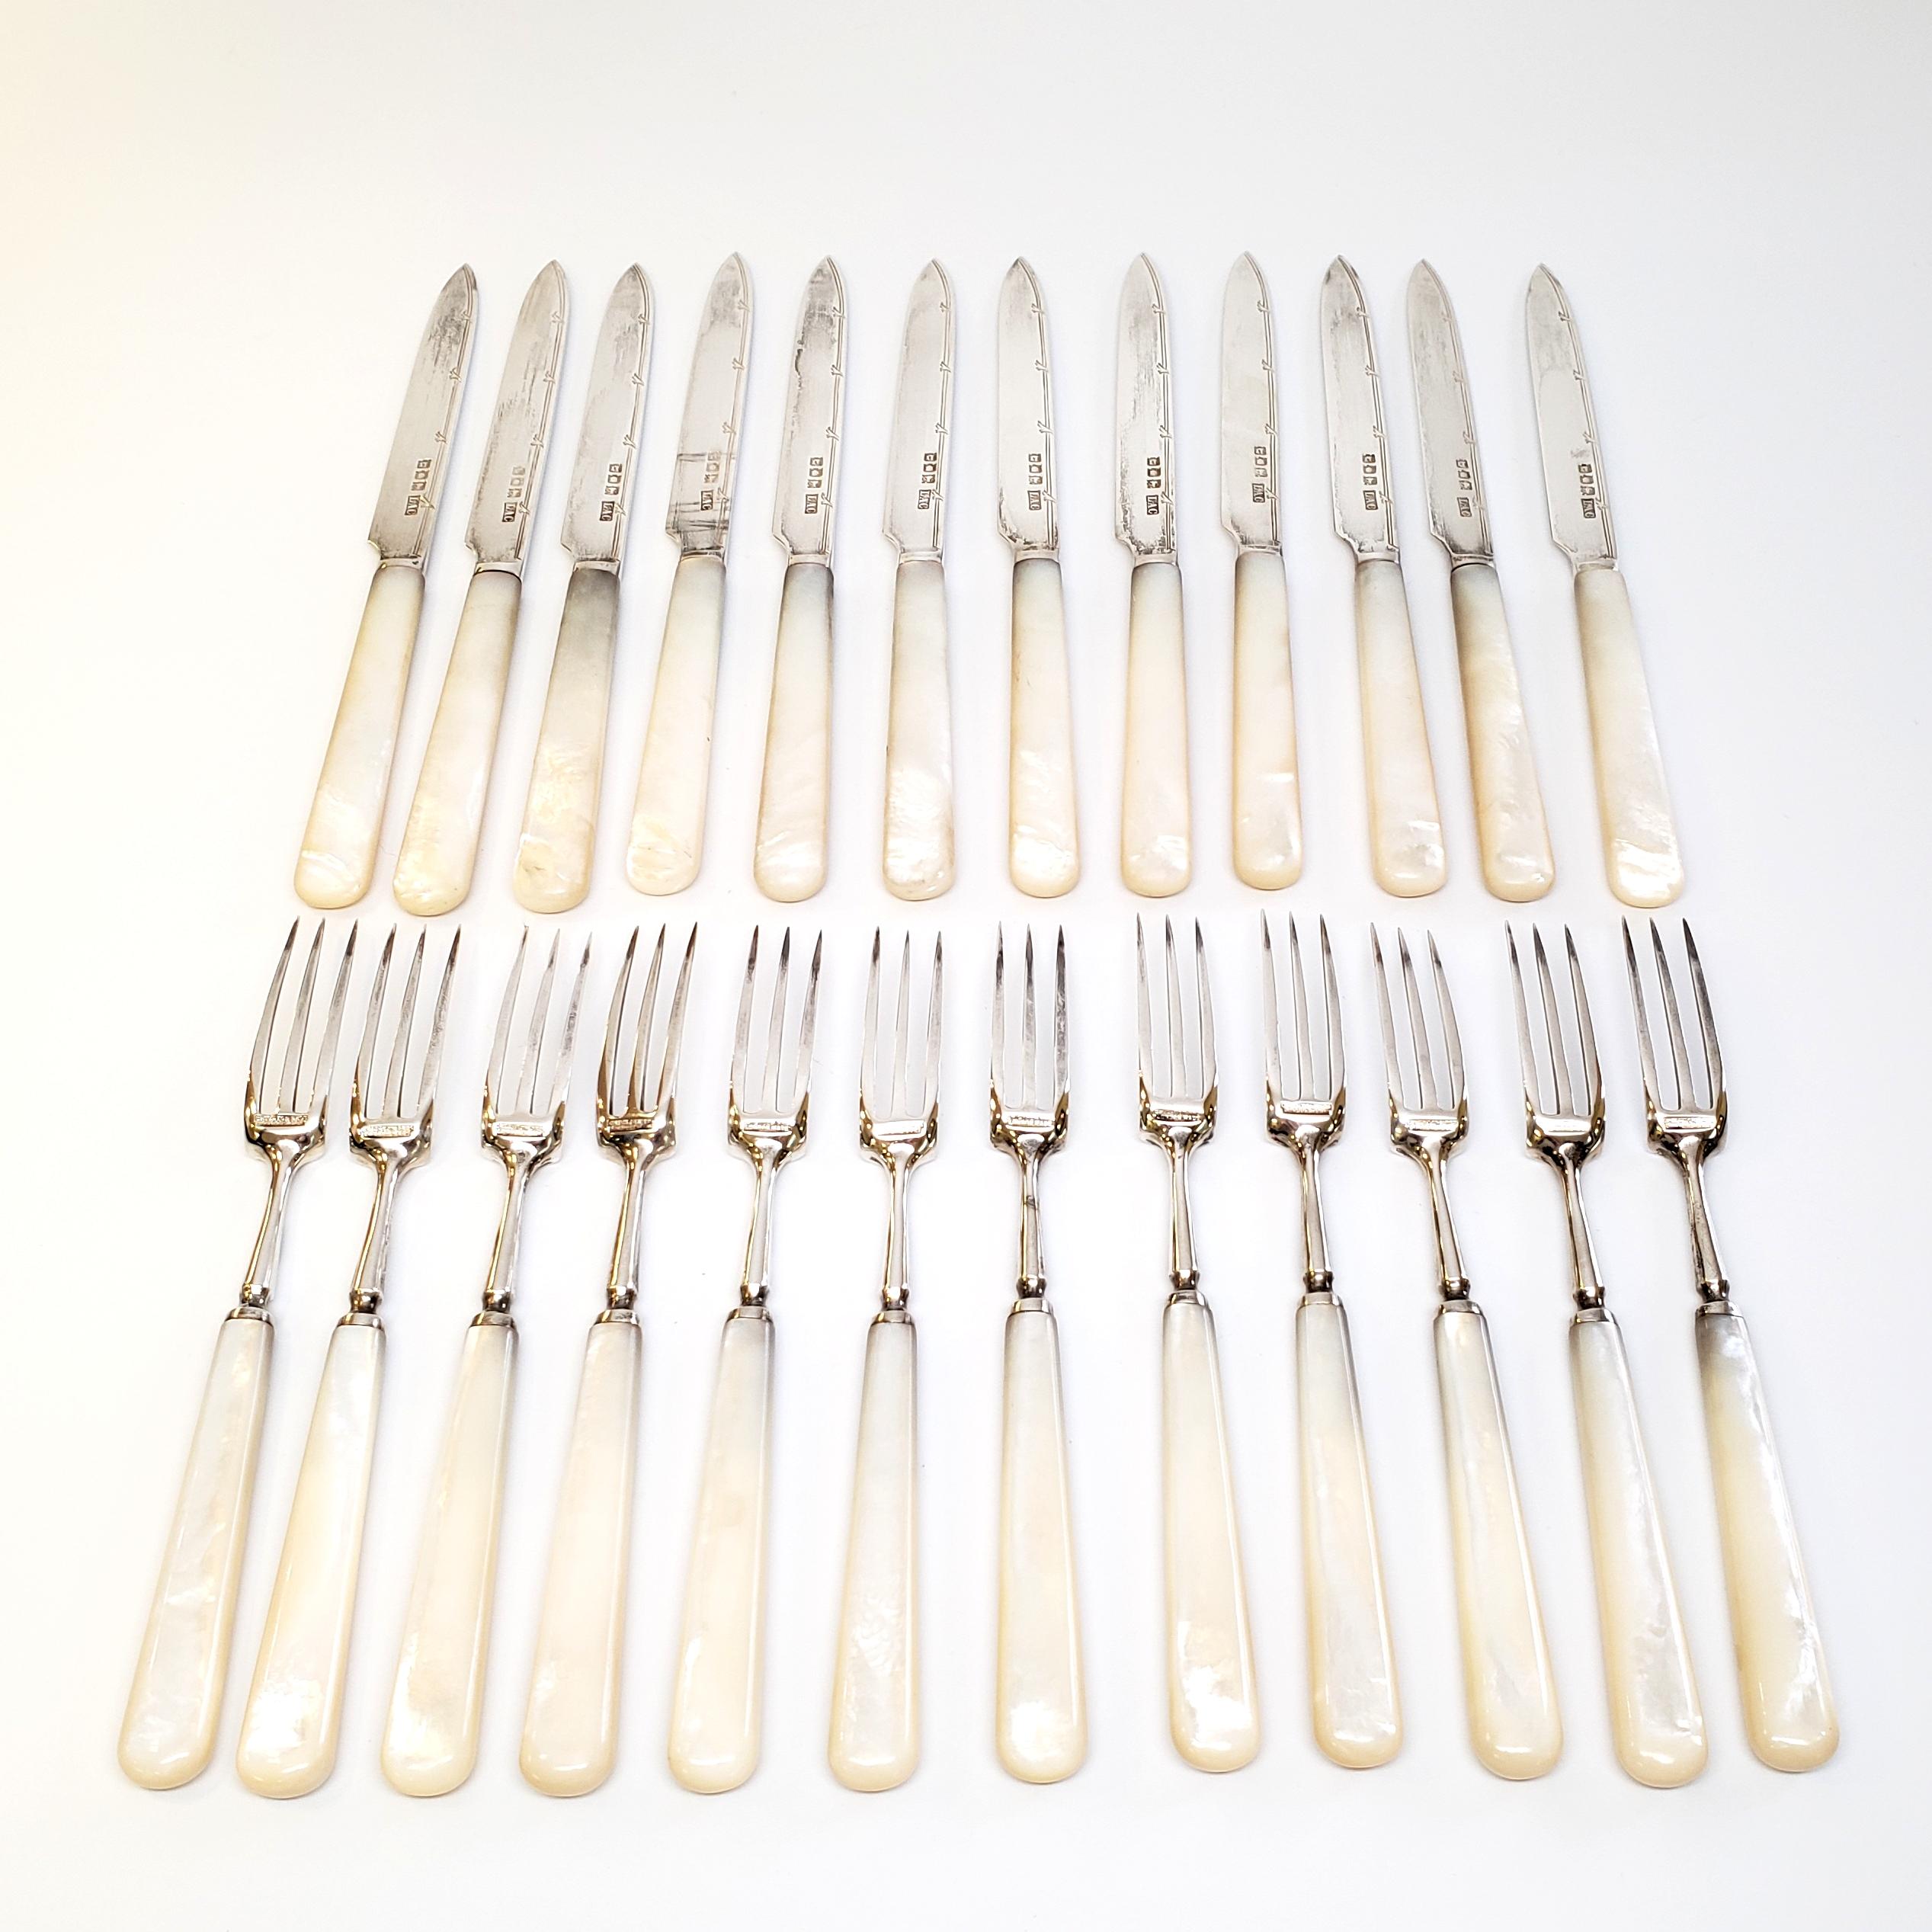 Antique sterling silver and mother of pearl handle fruit service, compromised of 12 fruit forks and 12 fruit knives by Crichton Bros.

Gorgeous set of George V fruit forks and knives, made in London by Crichton Bros in 1917. The shimmer in the